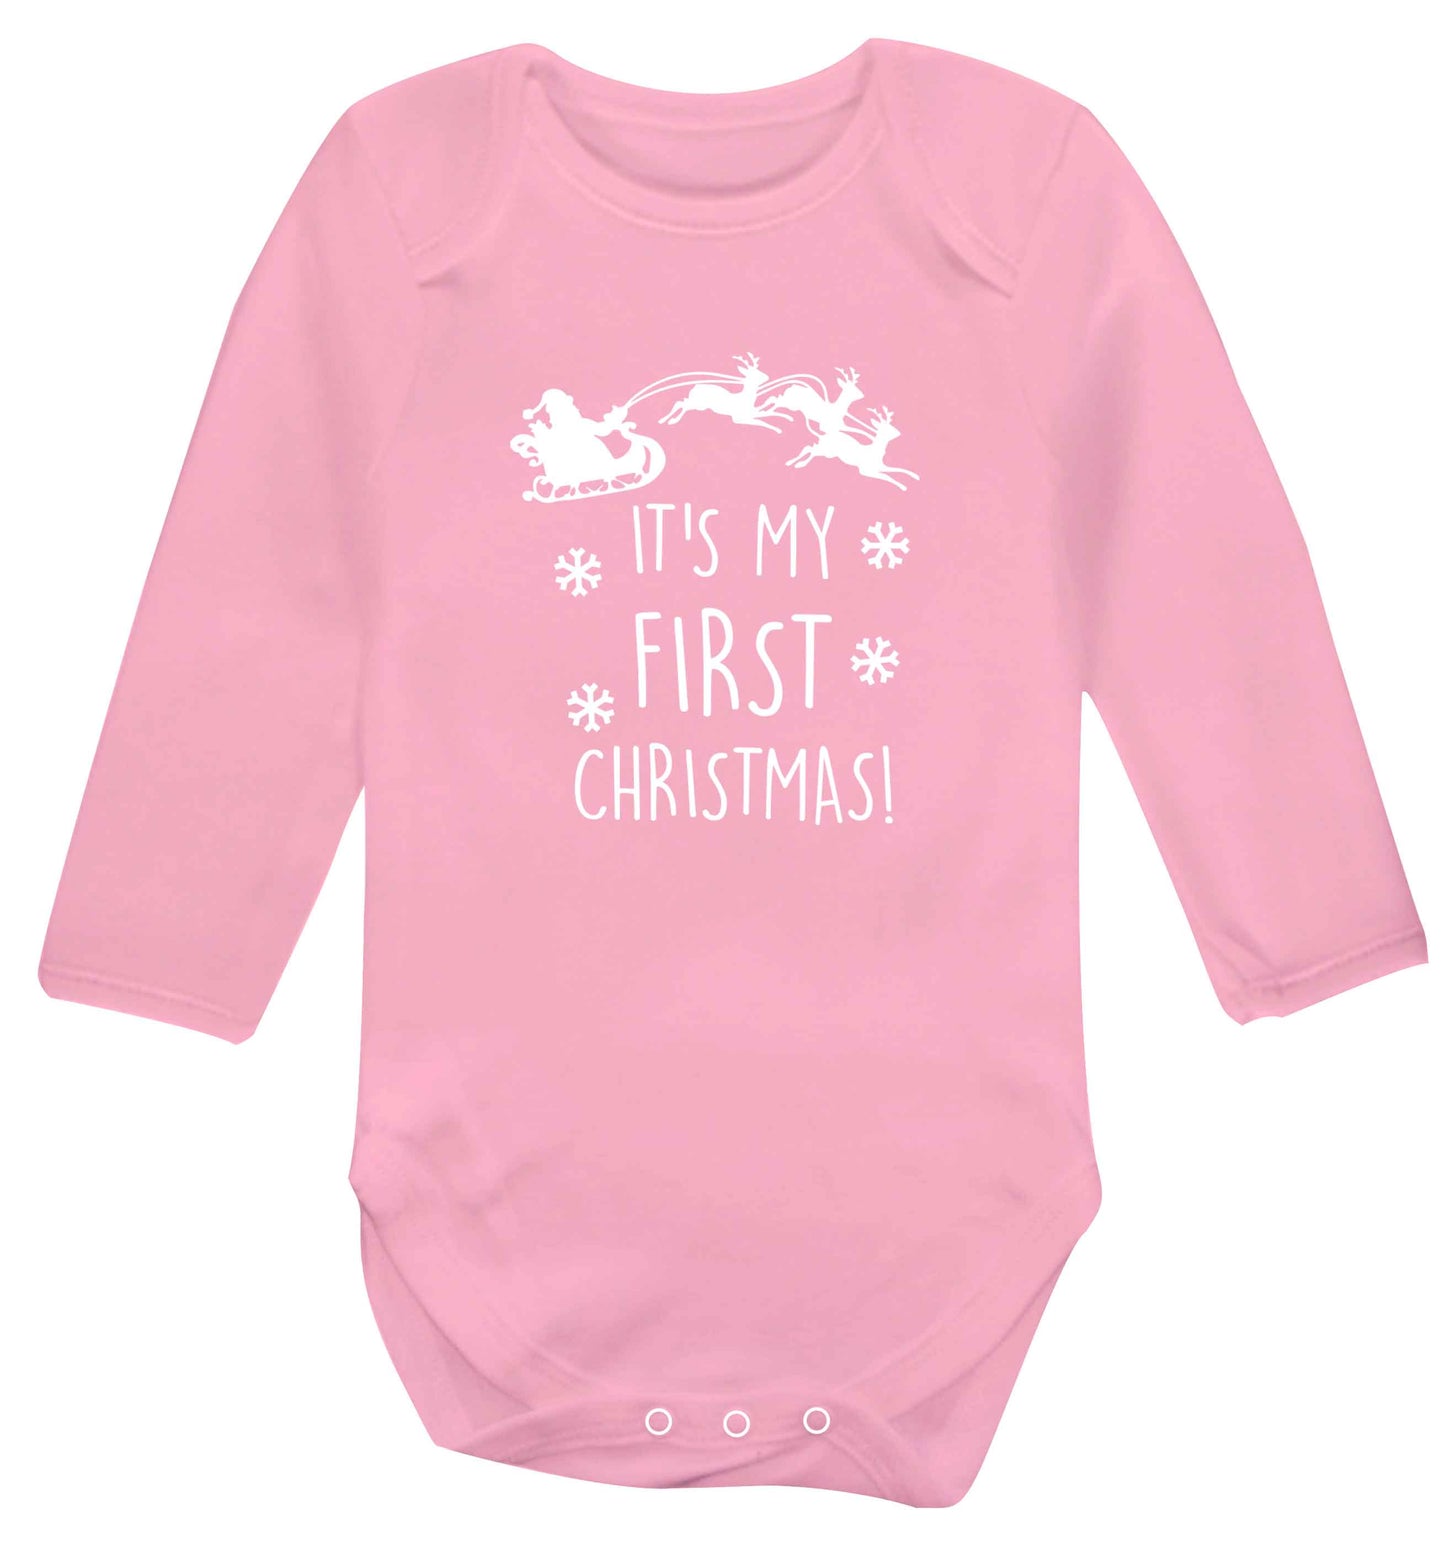 It's my first Christmas - Santa sleigh text baby vest long sleeved pale pink 6-12 months